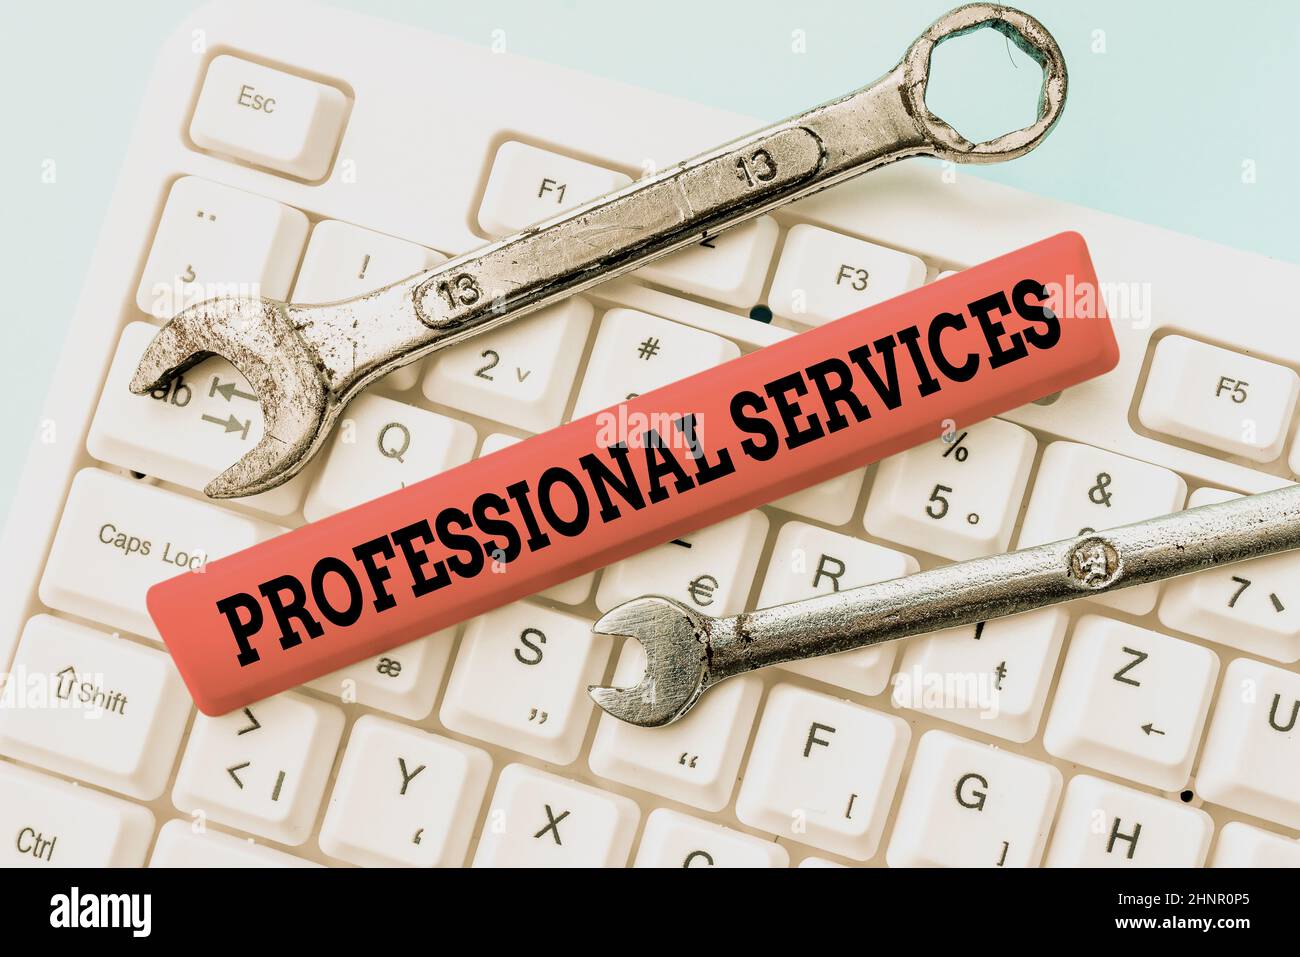 Inspiration showing sign Professional Services. Business concept offer Knowledge based help some require Licensed Downloading Online Files And Data, Uploading Programming Codes Stock Photo